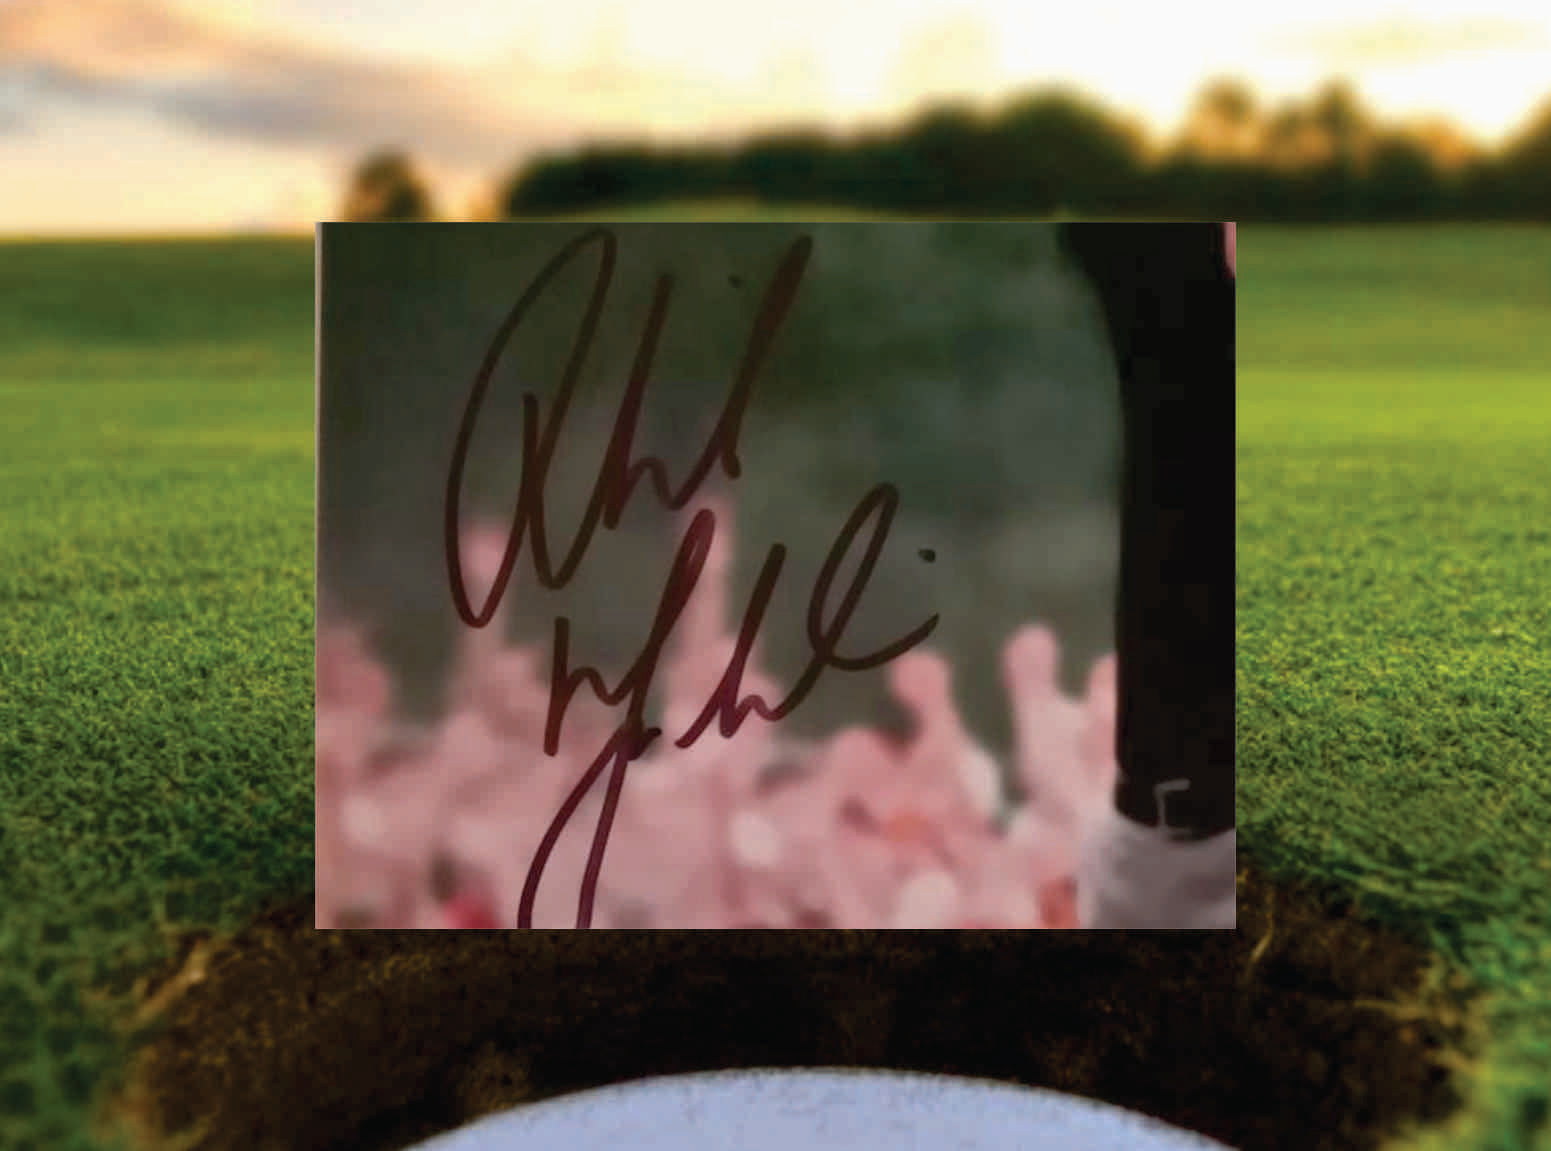 Phil Mickelson 8 x 10 photo signed with proof